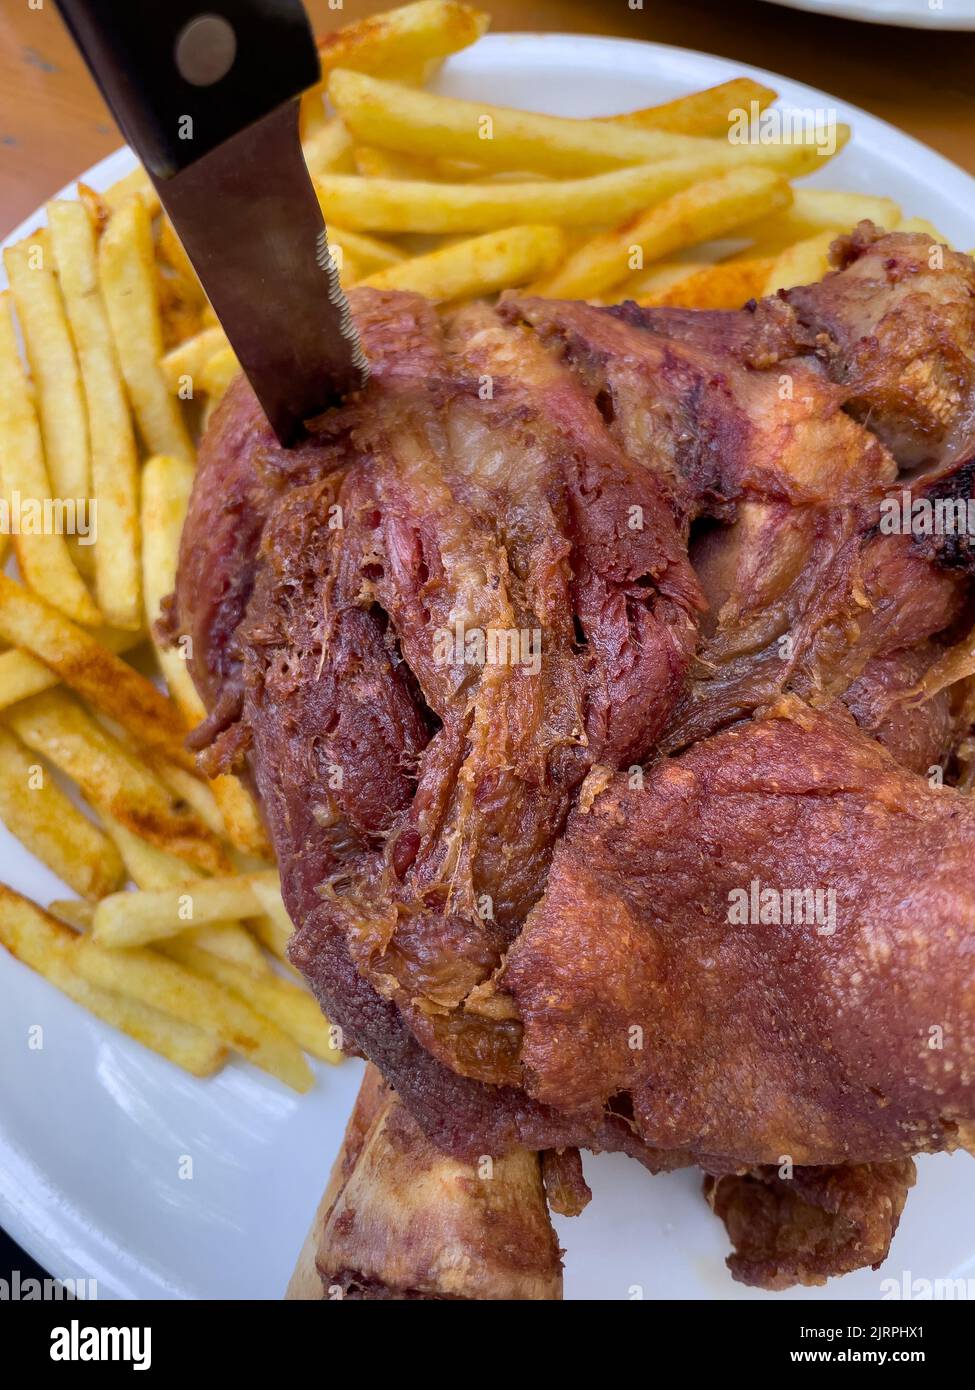 Pork knuckle with french fries. Stock Photo